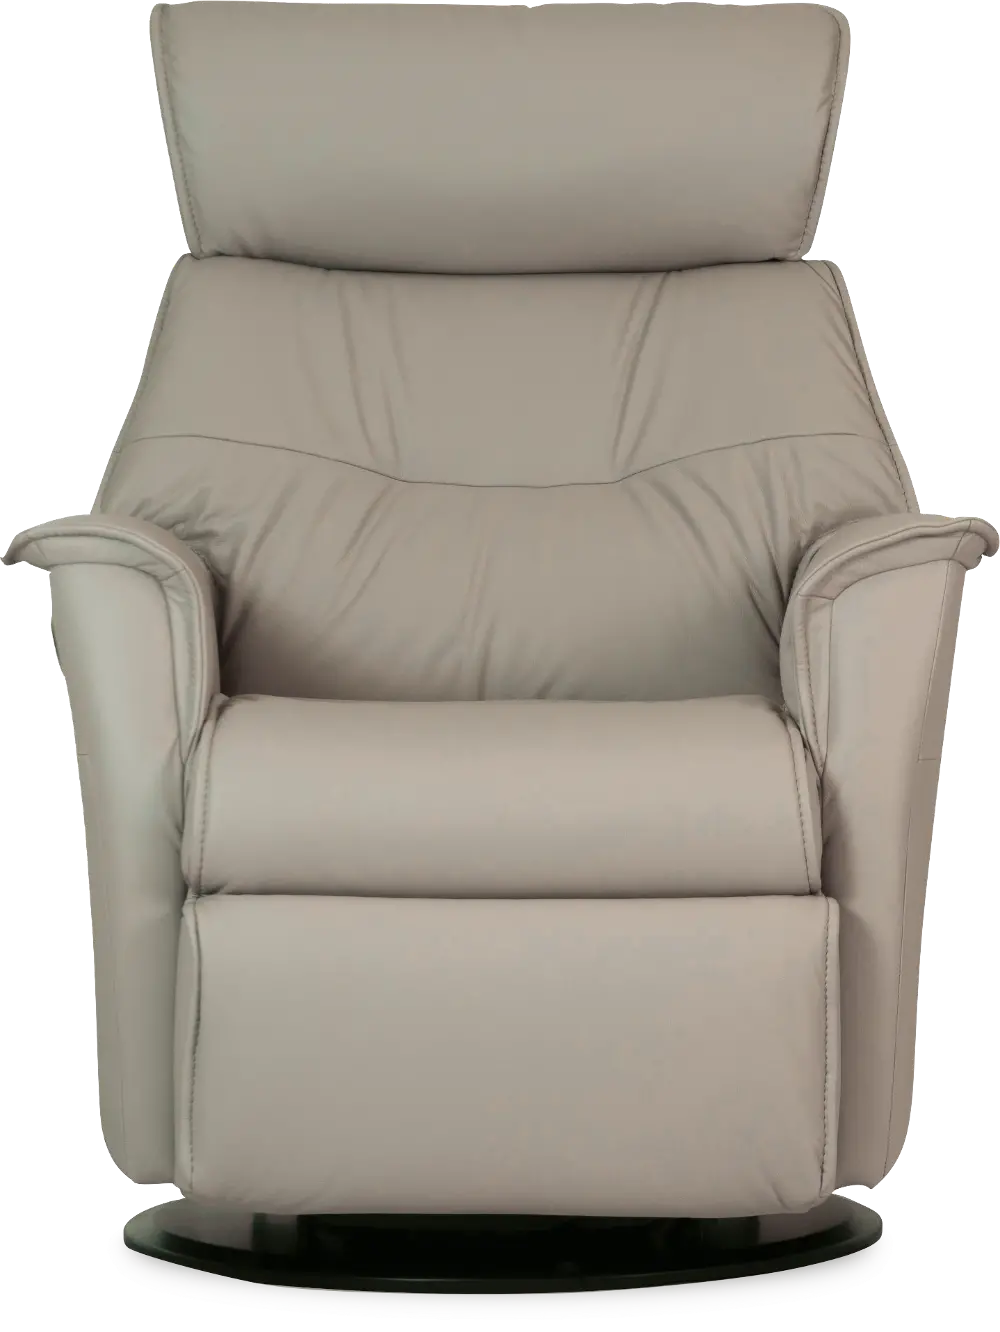 Cinder Taupe Standard Leather Swivel Glider Manual Recliner - Captain-1